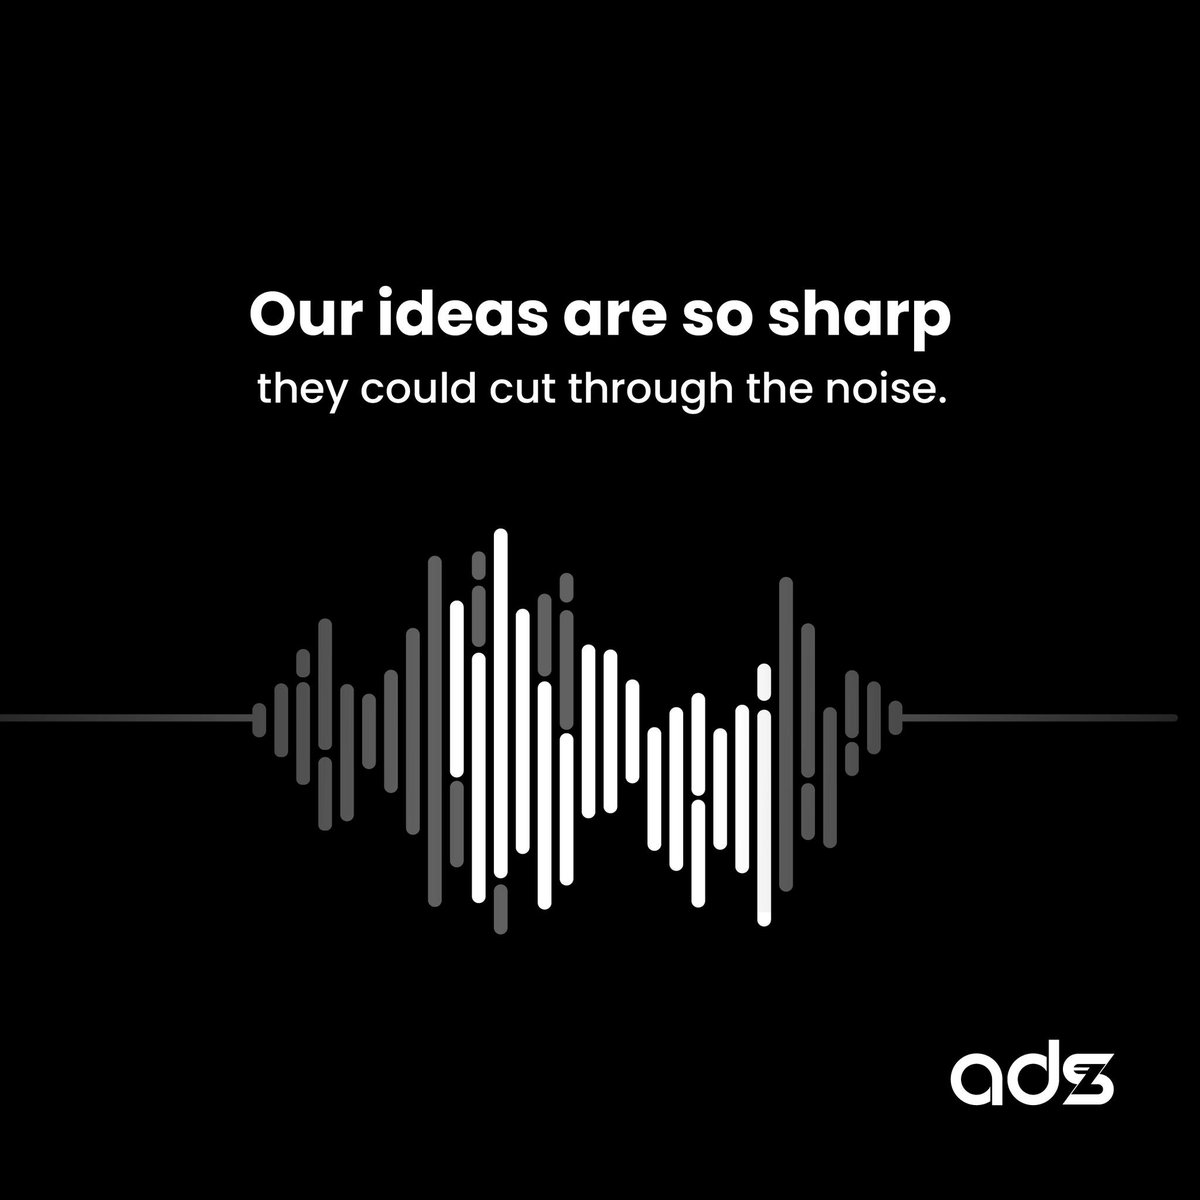 Our ideas are the sharpest tools in the marketing shed. Ready to slice through the noise and make your brand stand out.

#Adze #Adzedigitalmarketingagency #InnovationAndTradition #NewLogoReveal #BridgingPastAndFuture #DigitalExperiences #CreativityAndExcellence #ArtisansOfOld